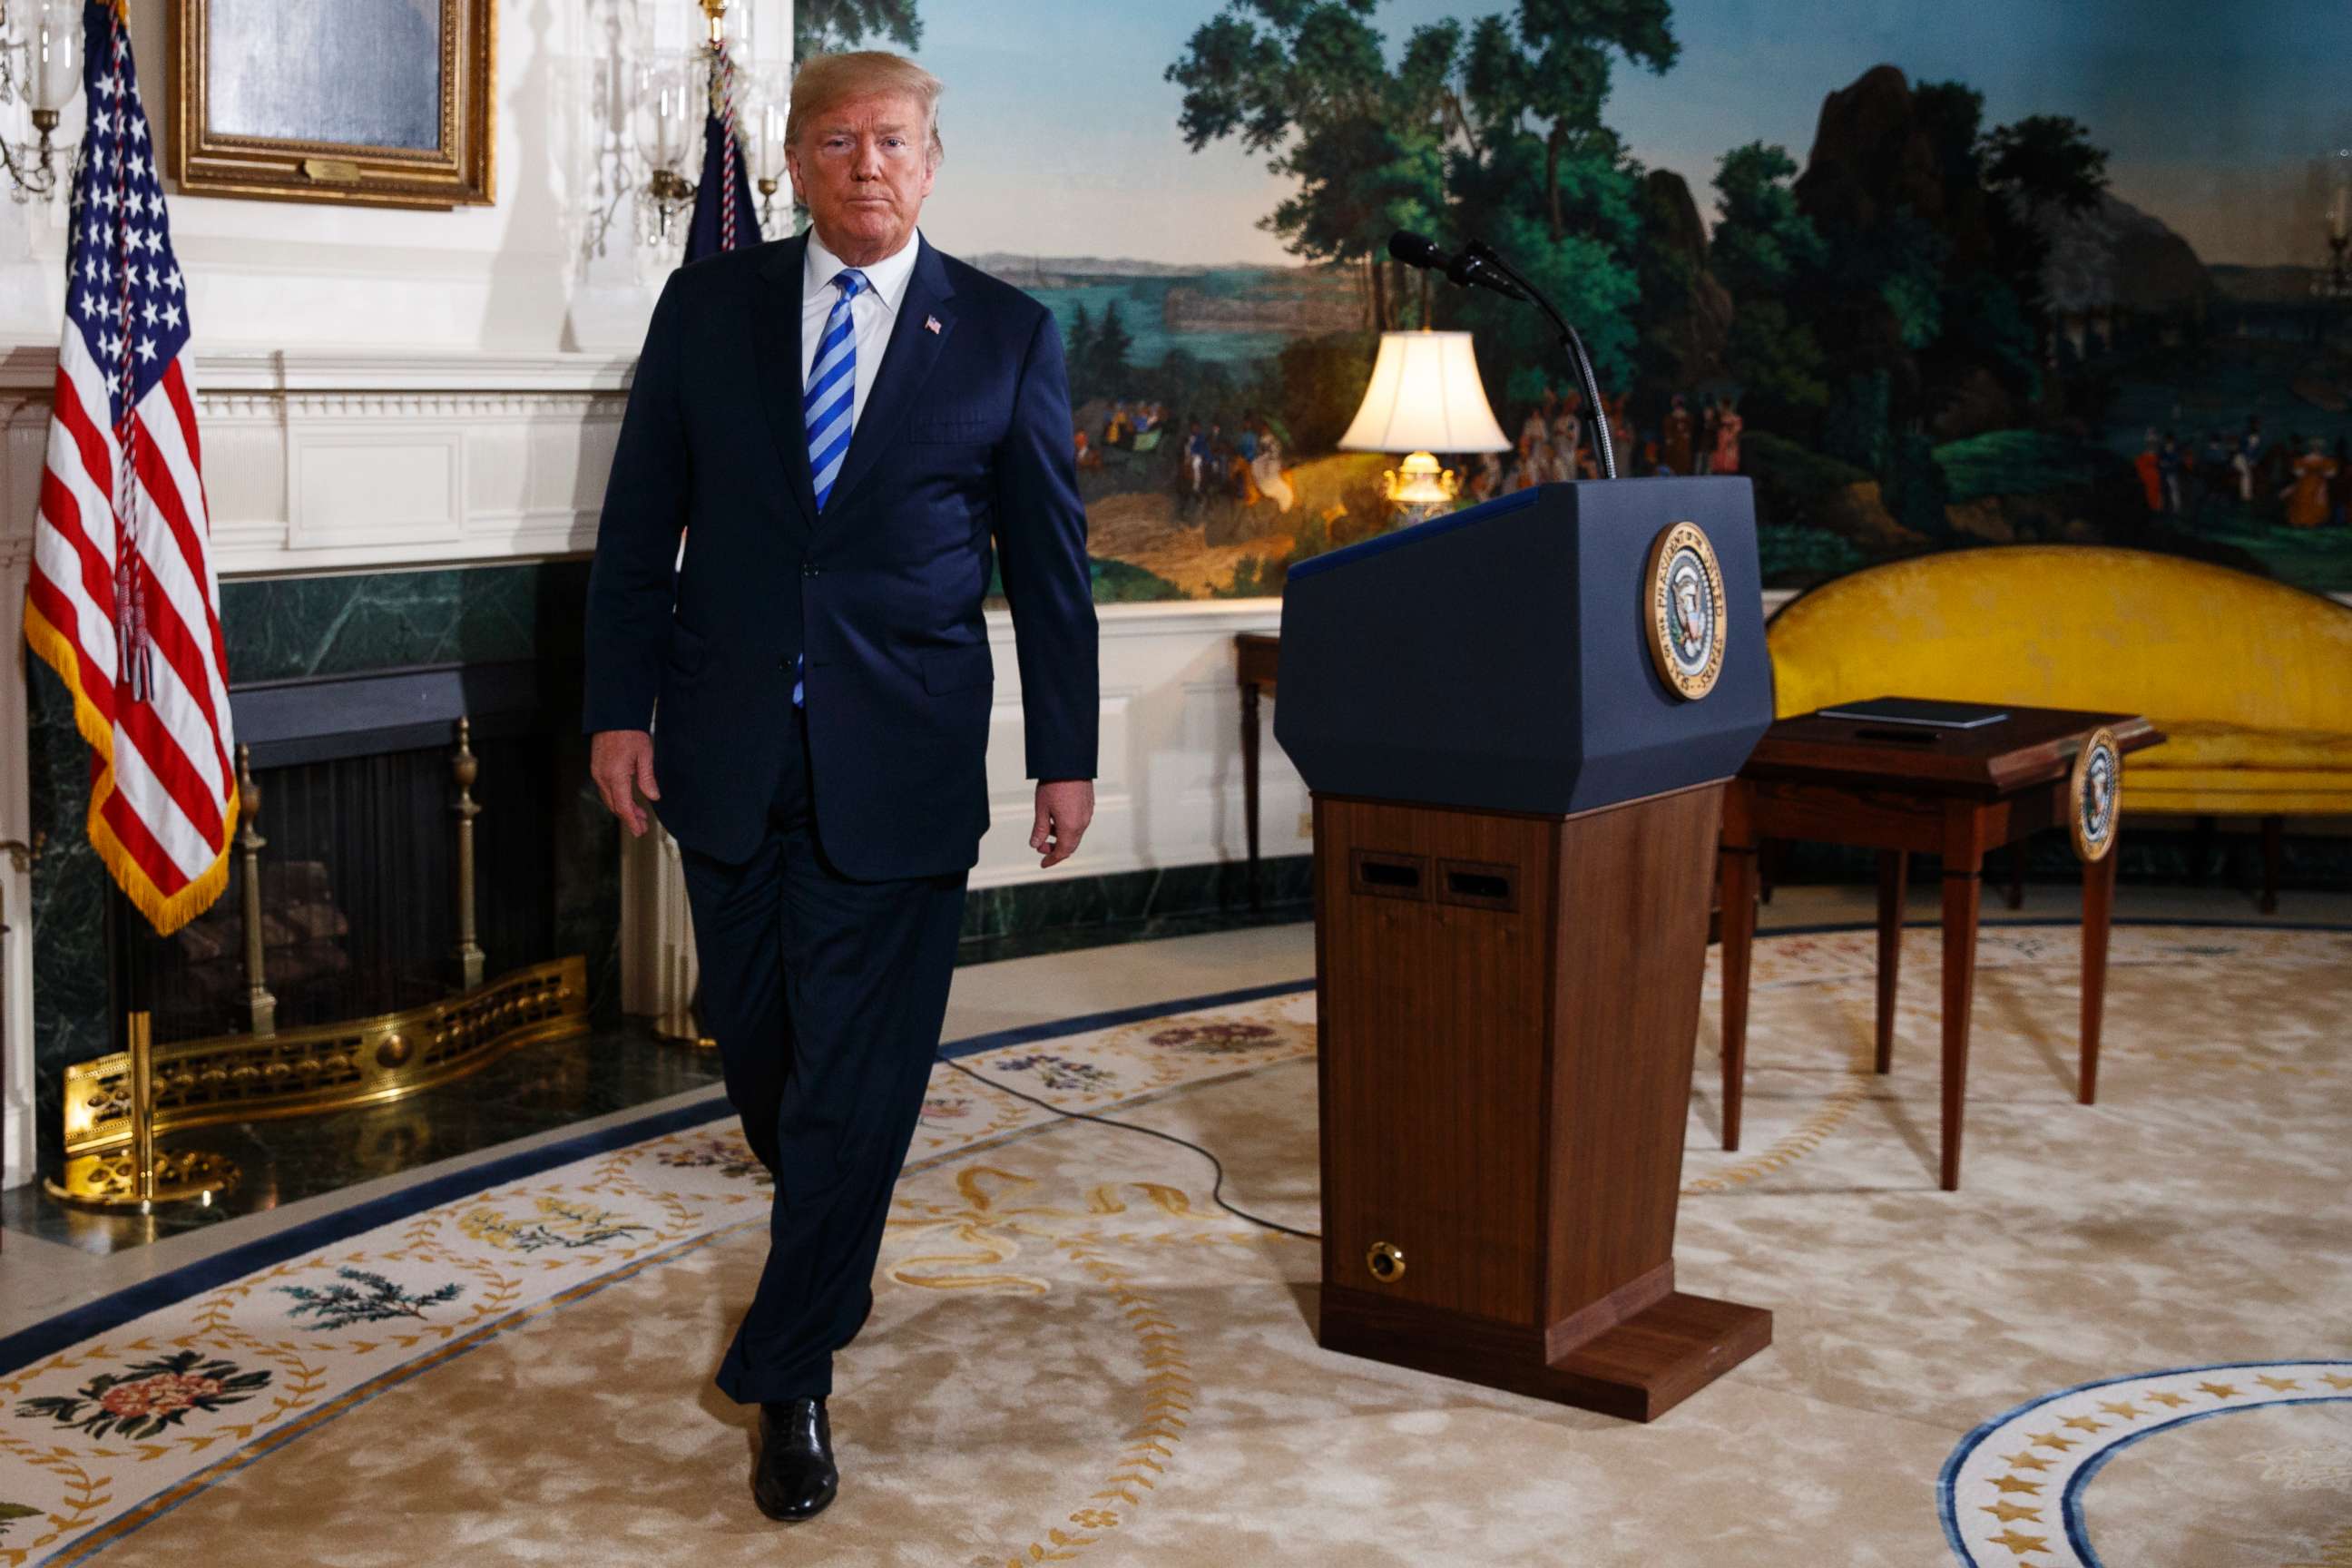 PHOTO: Donald Trump walks off after delivering a statement on the Iran nuclear deal from the Diplomatic Reception Room of the White House, May 8, 2018.